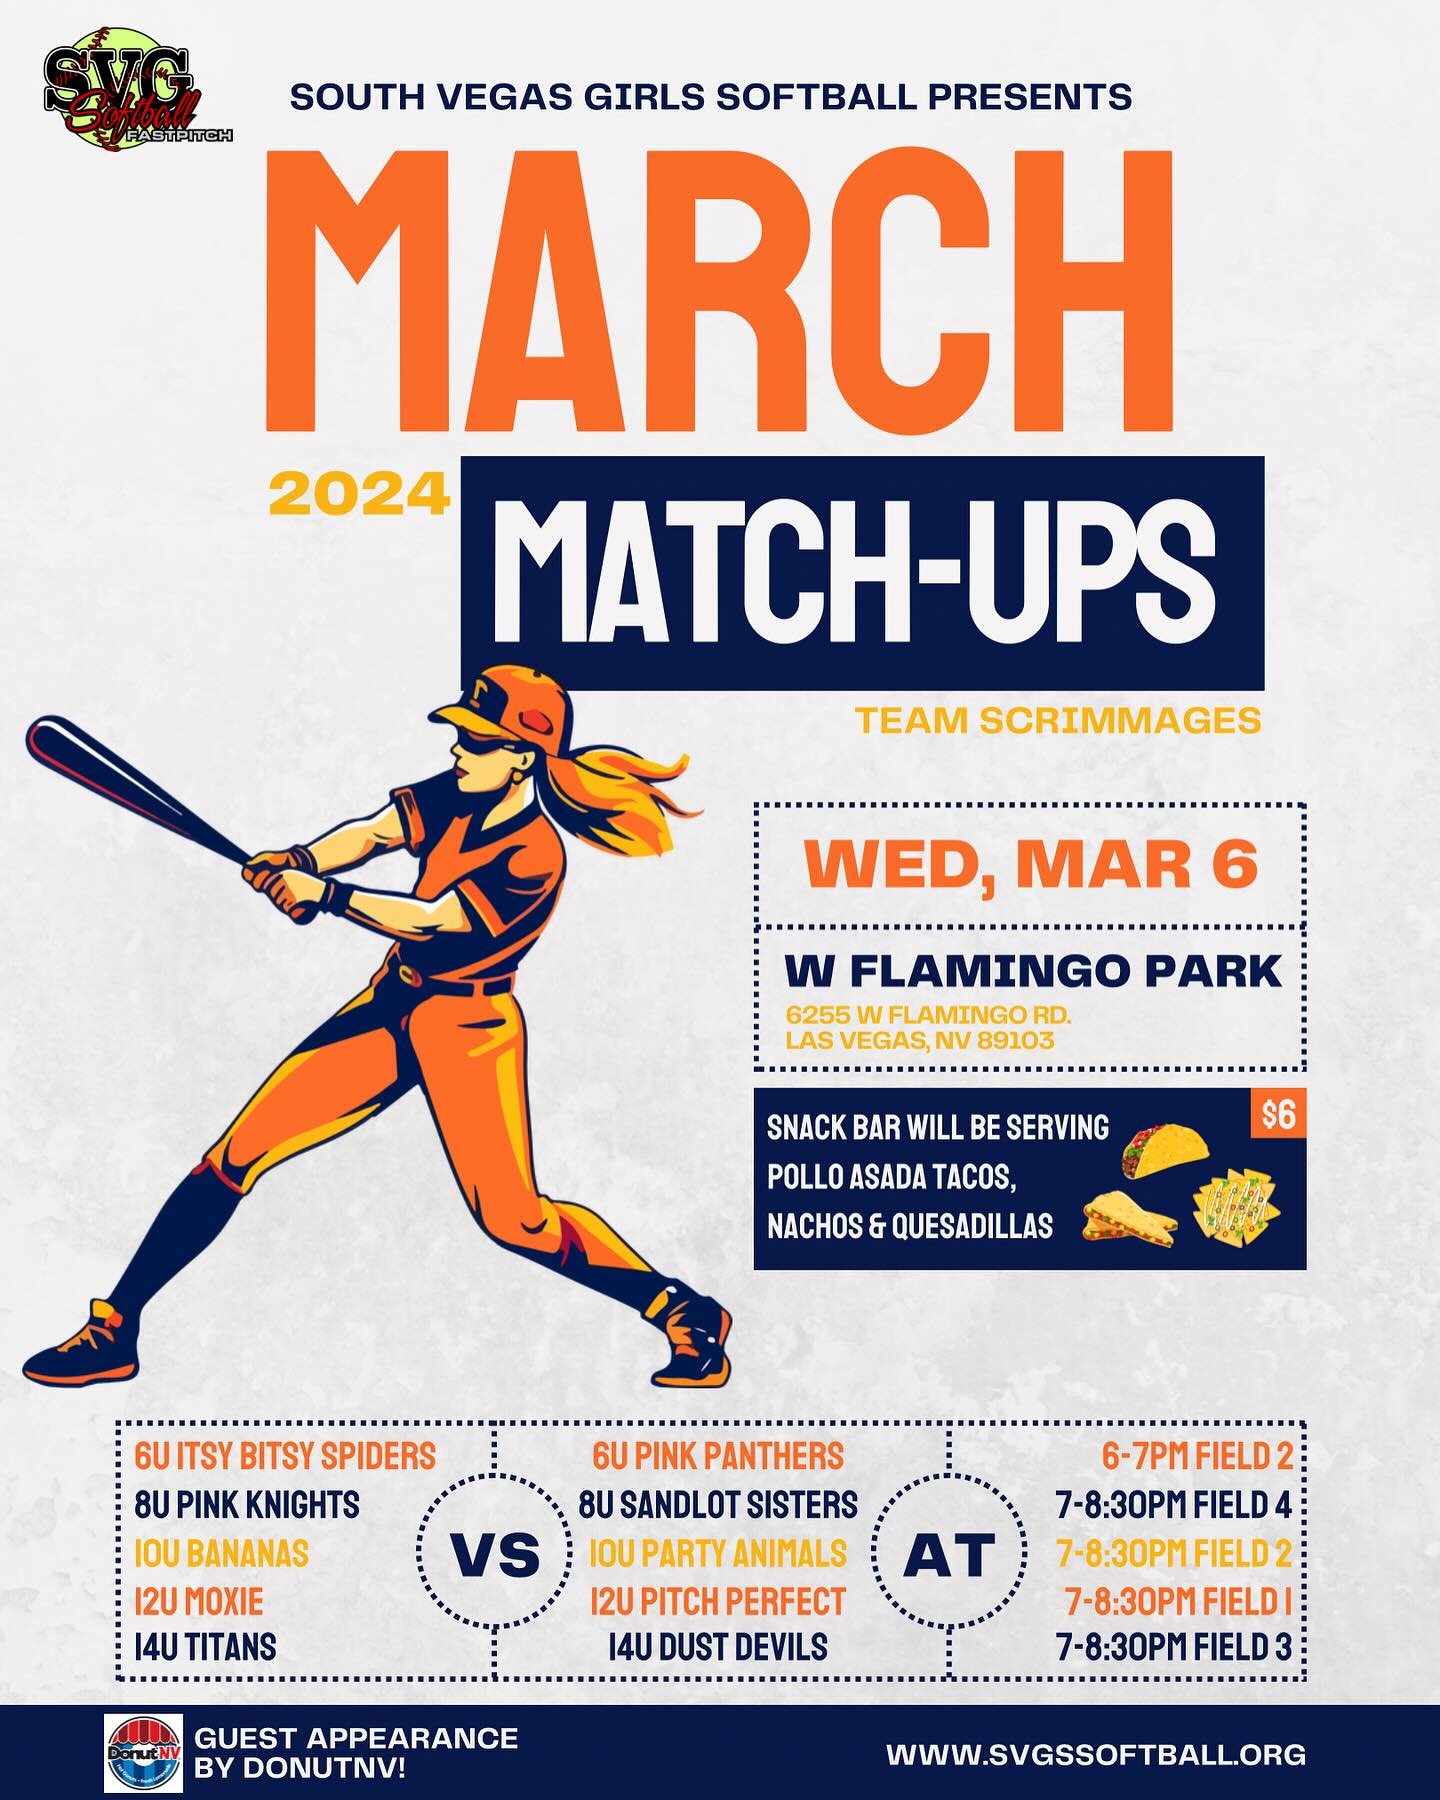 Heads Up! 🗣️ Our first event of the season will be Wednesday, March 6th! 

We will be holding our very first March Match-Ups 🥎 Where each of our teams will be scrimmaging their counterpart!

The snack bar will be serving pollo asada tacos, nachos &